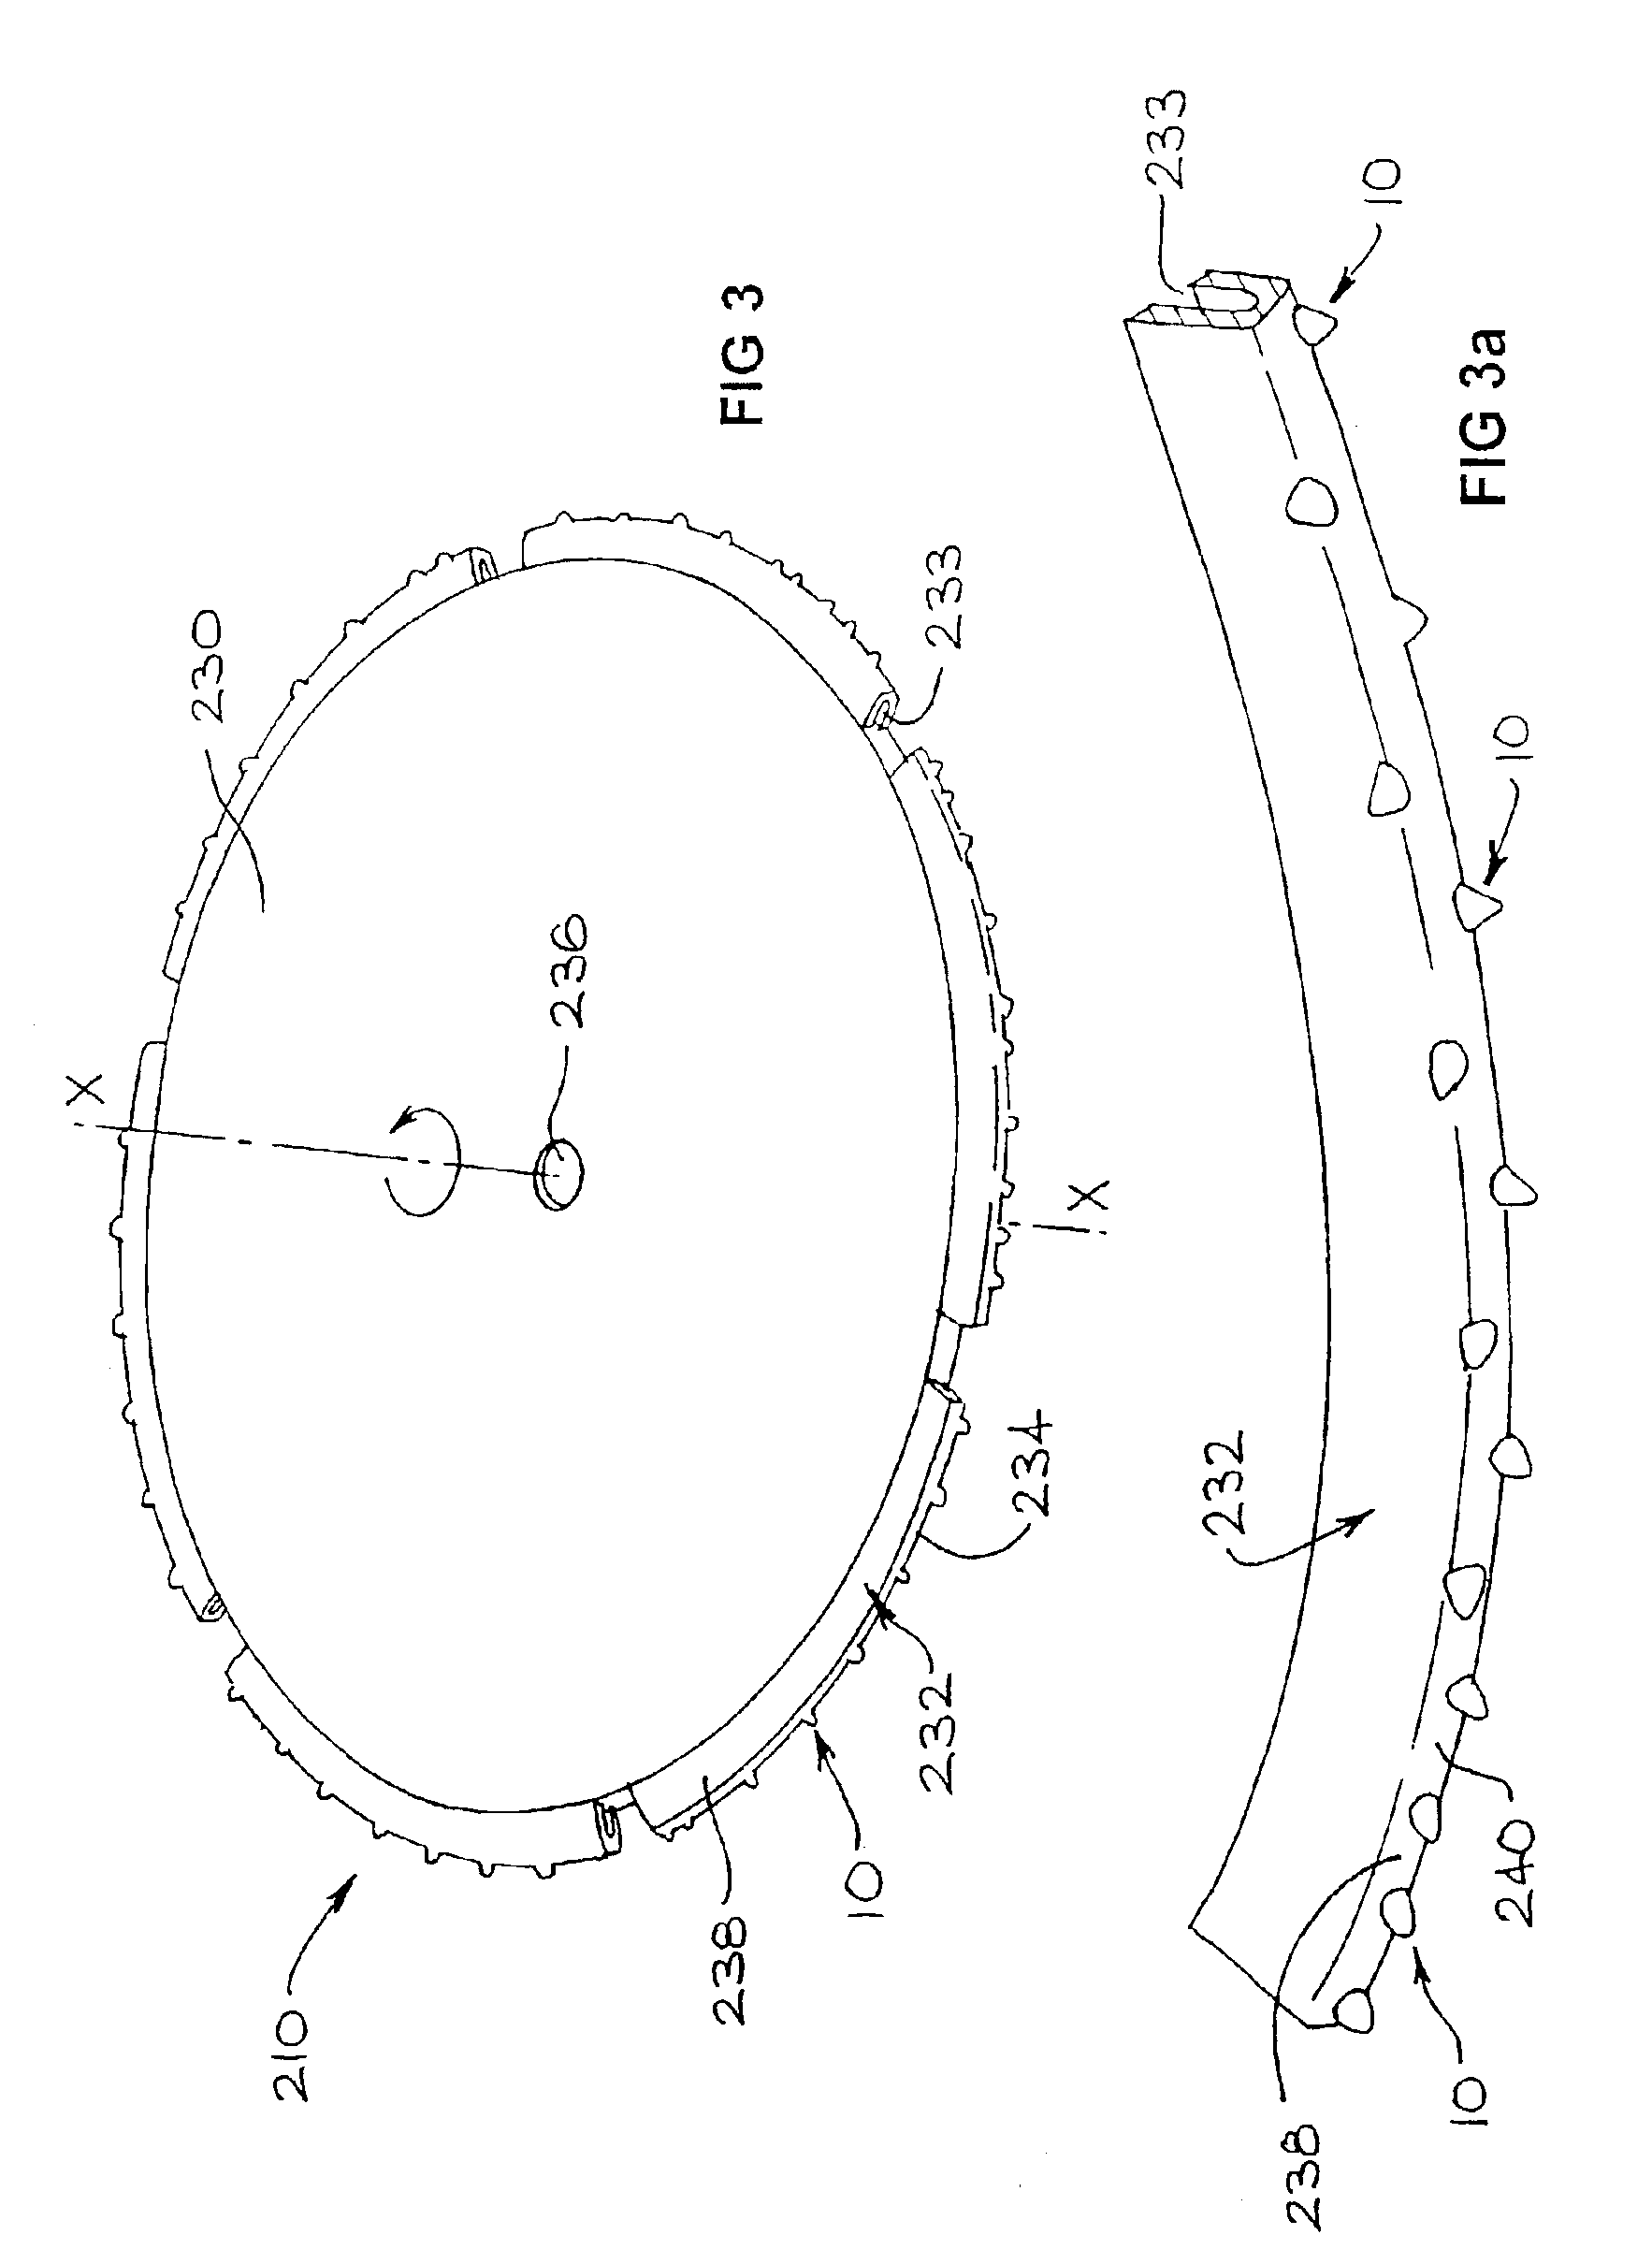 Cutting tool and method of using same